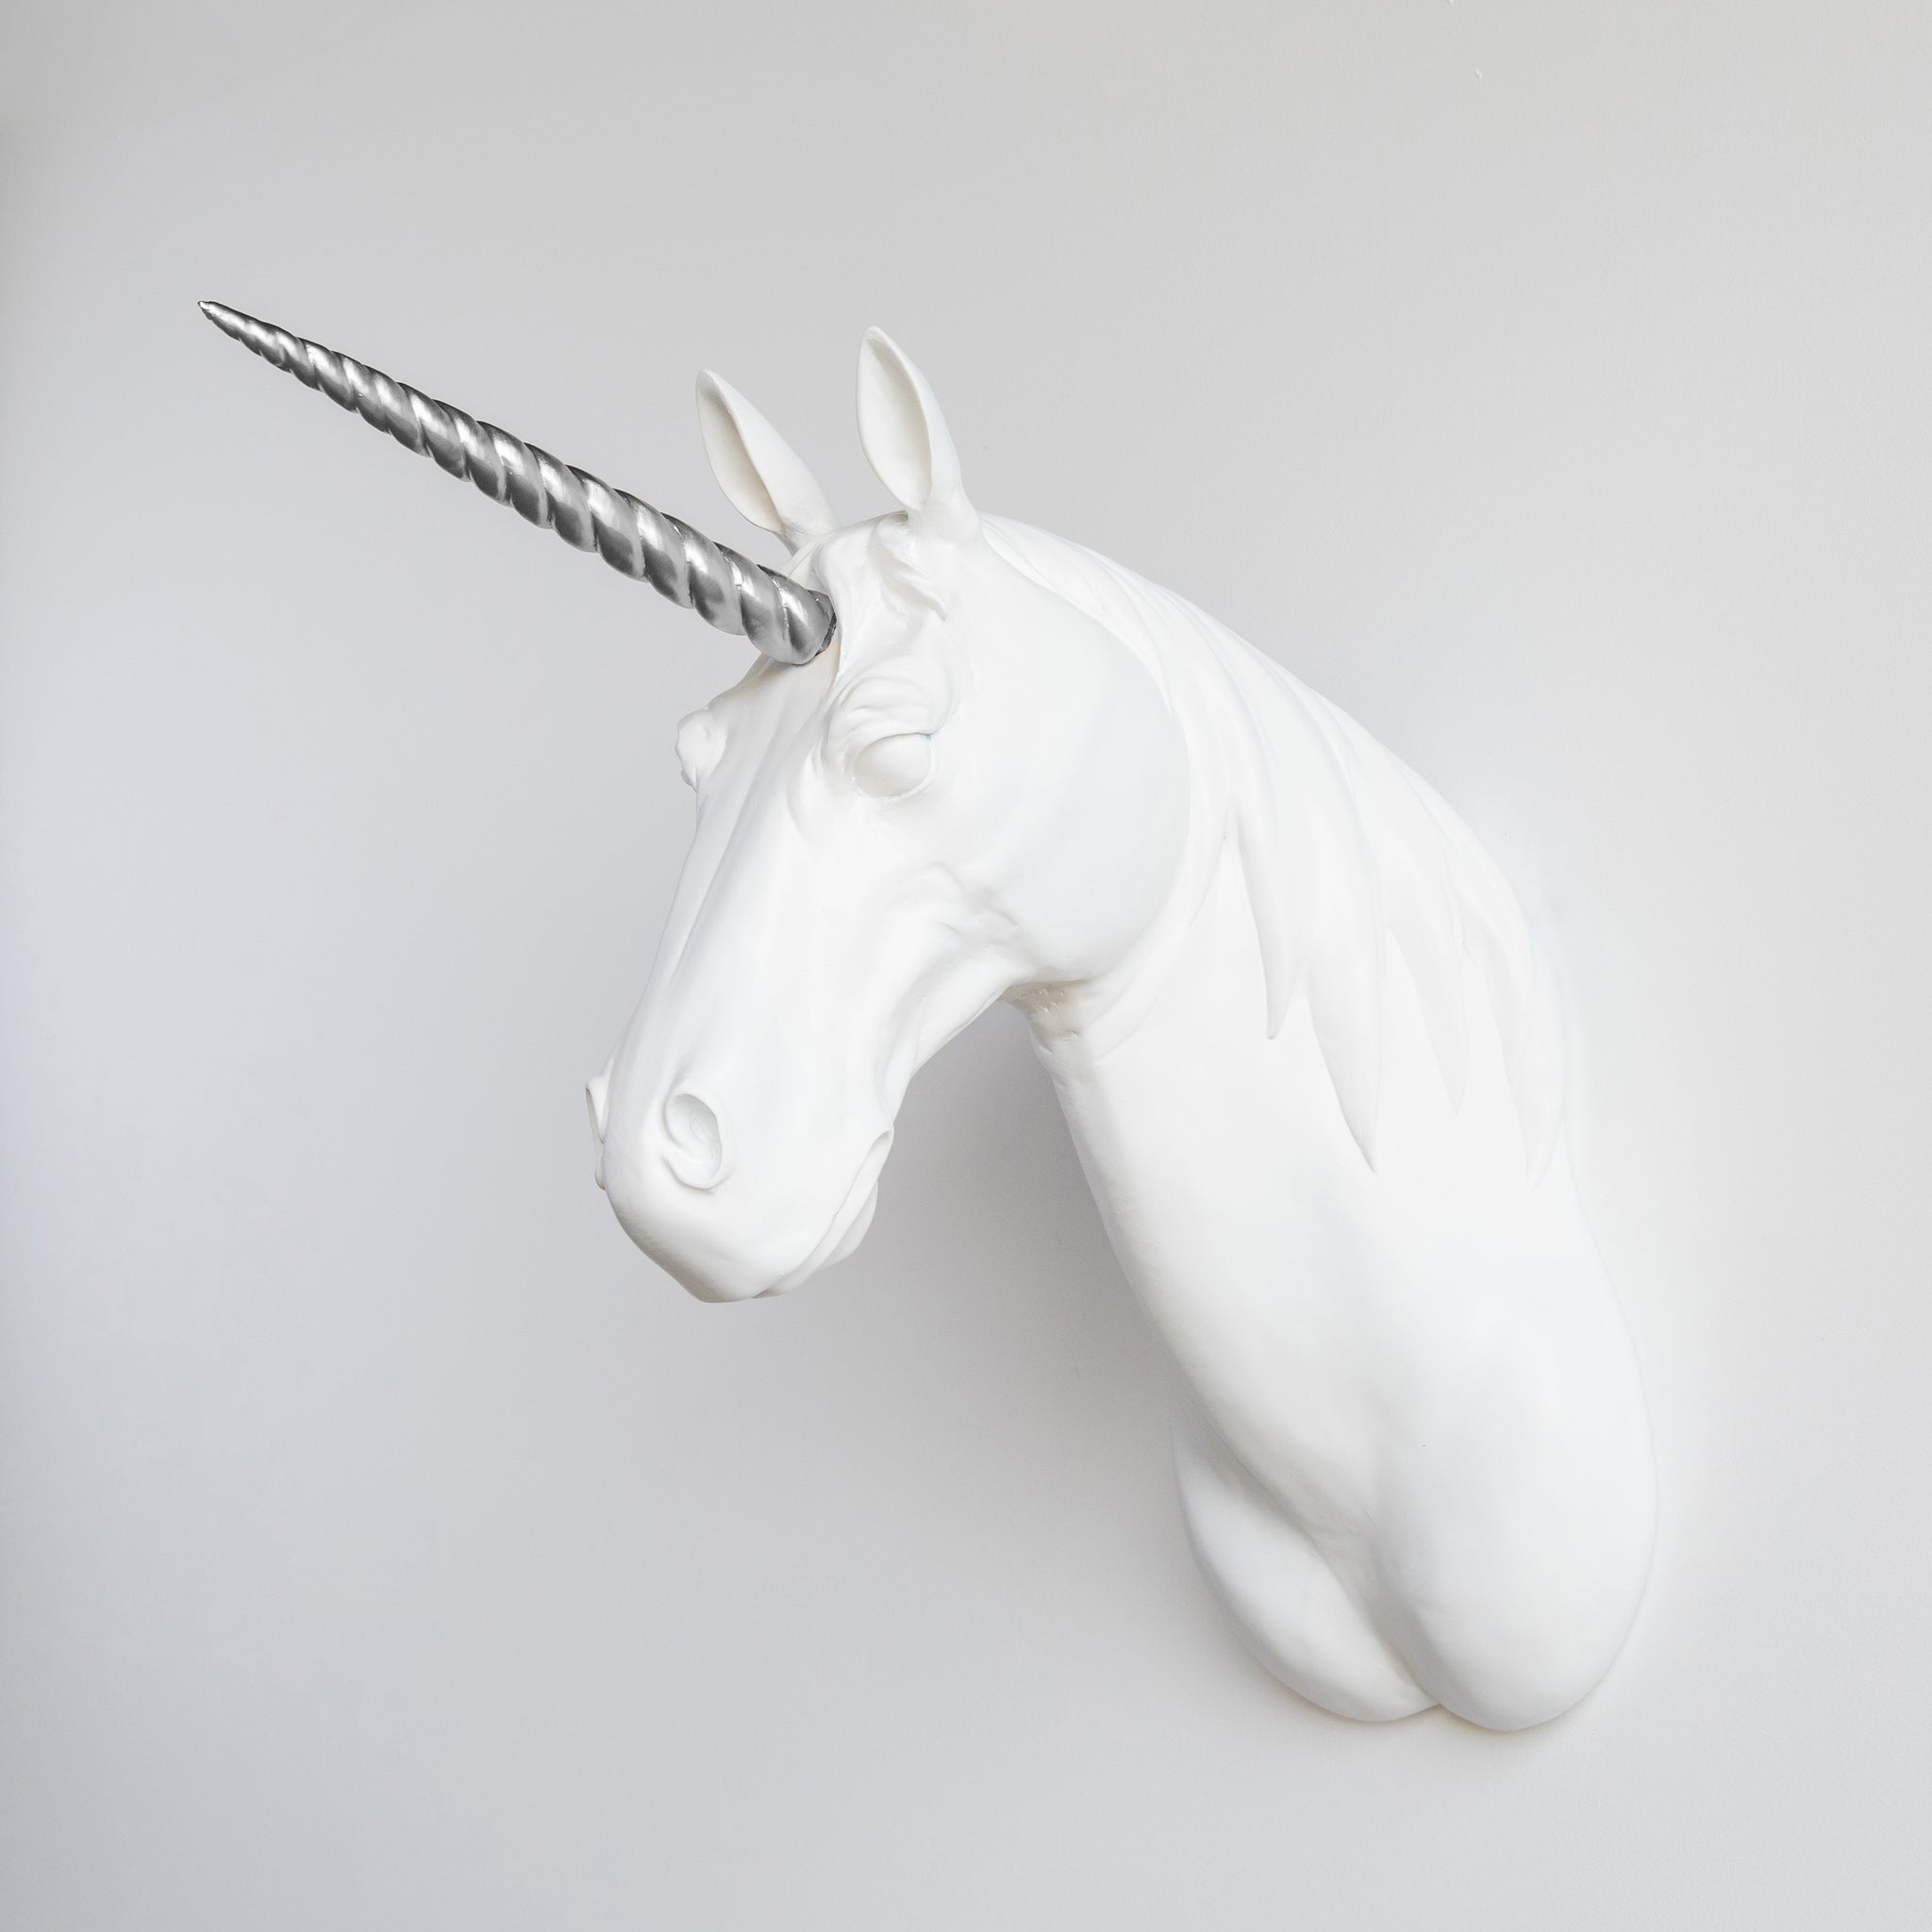 XL Unicorn Head Wall Mount // White and Silver